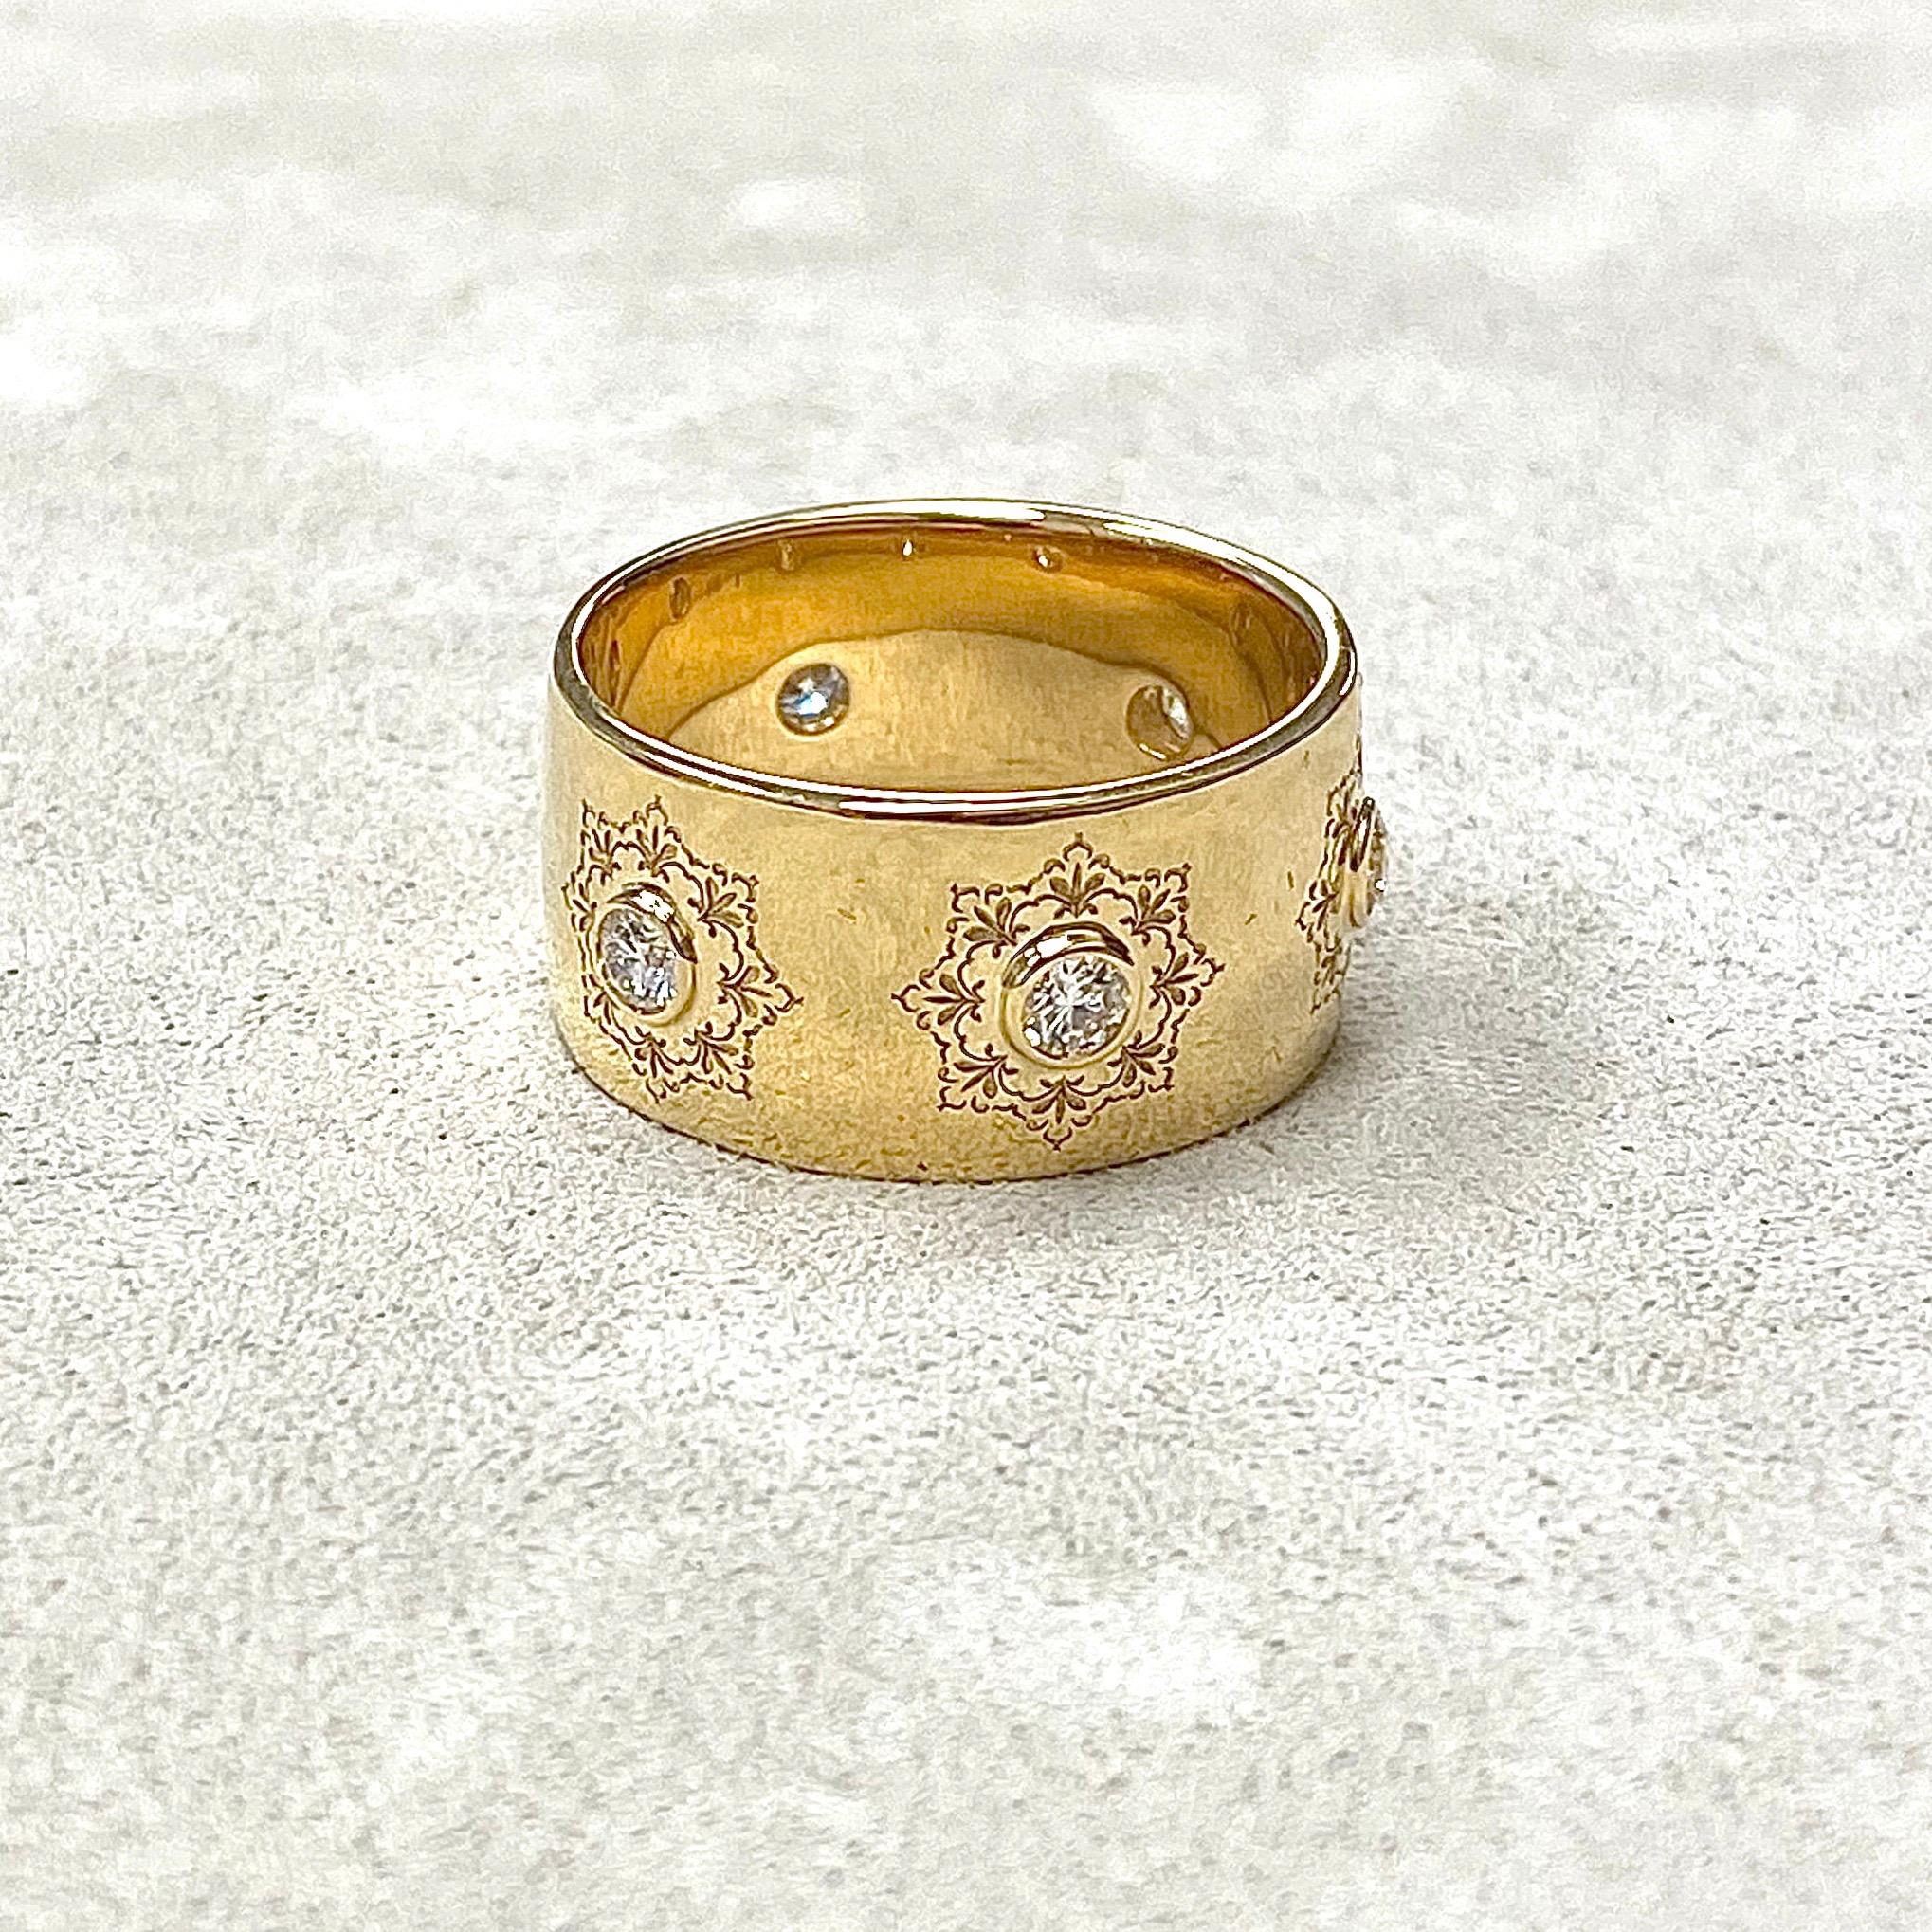 Created in 18 karat yellow gold
Diamonds 0.35 ct approx
Hand engraving
Band size US 7.5 
Limited edition

Exquisitely crafted with 18 karat yellow gold, this limited edition ring features a hand-engraved band of US size 7.5 and radiates with the